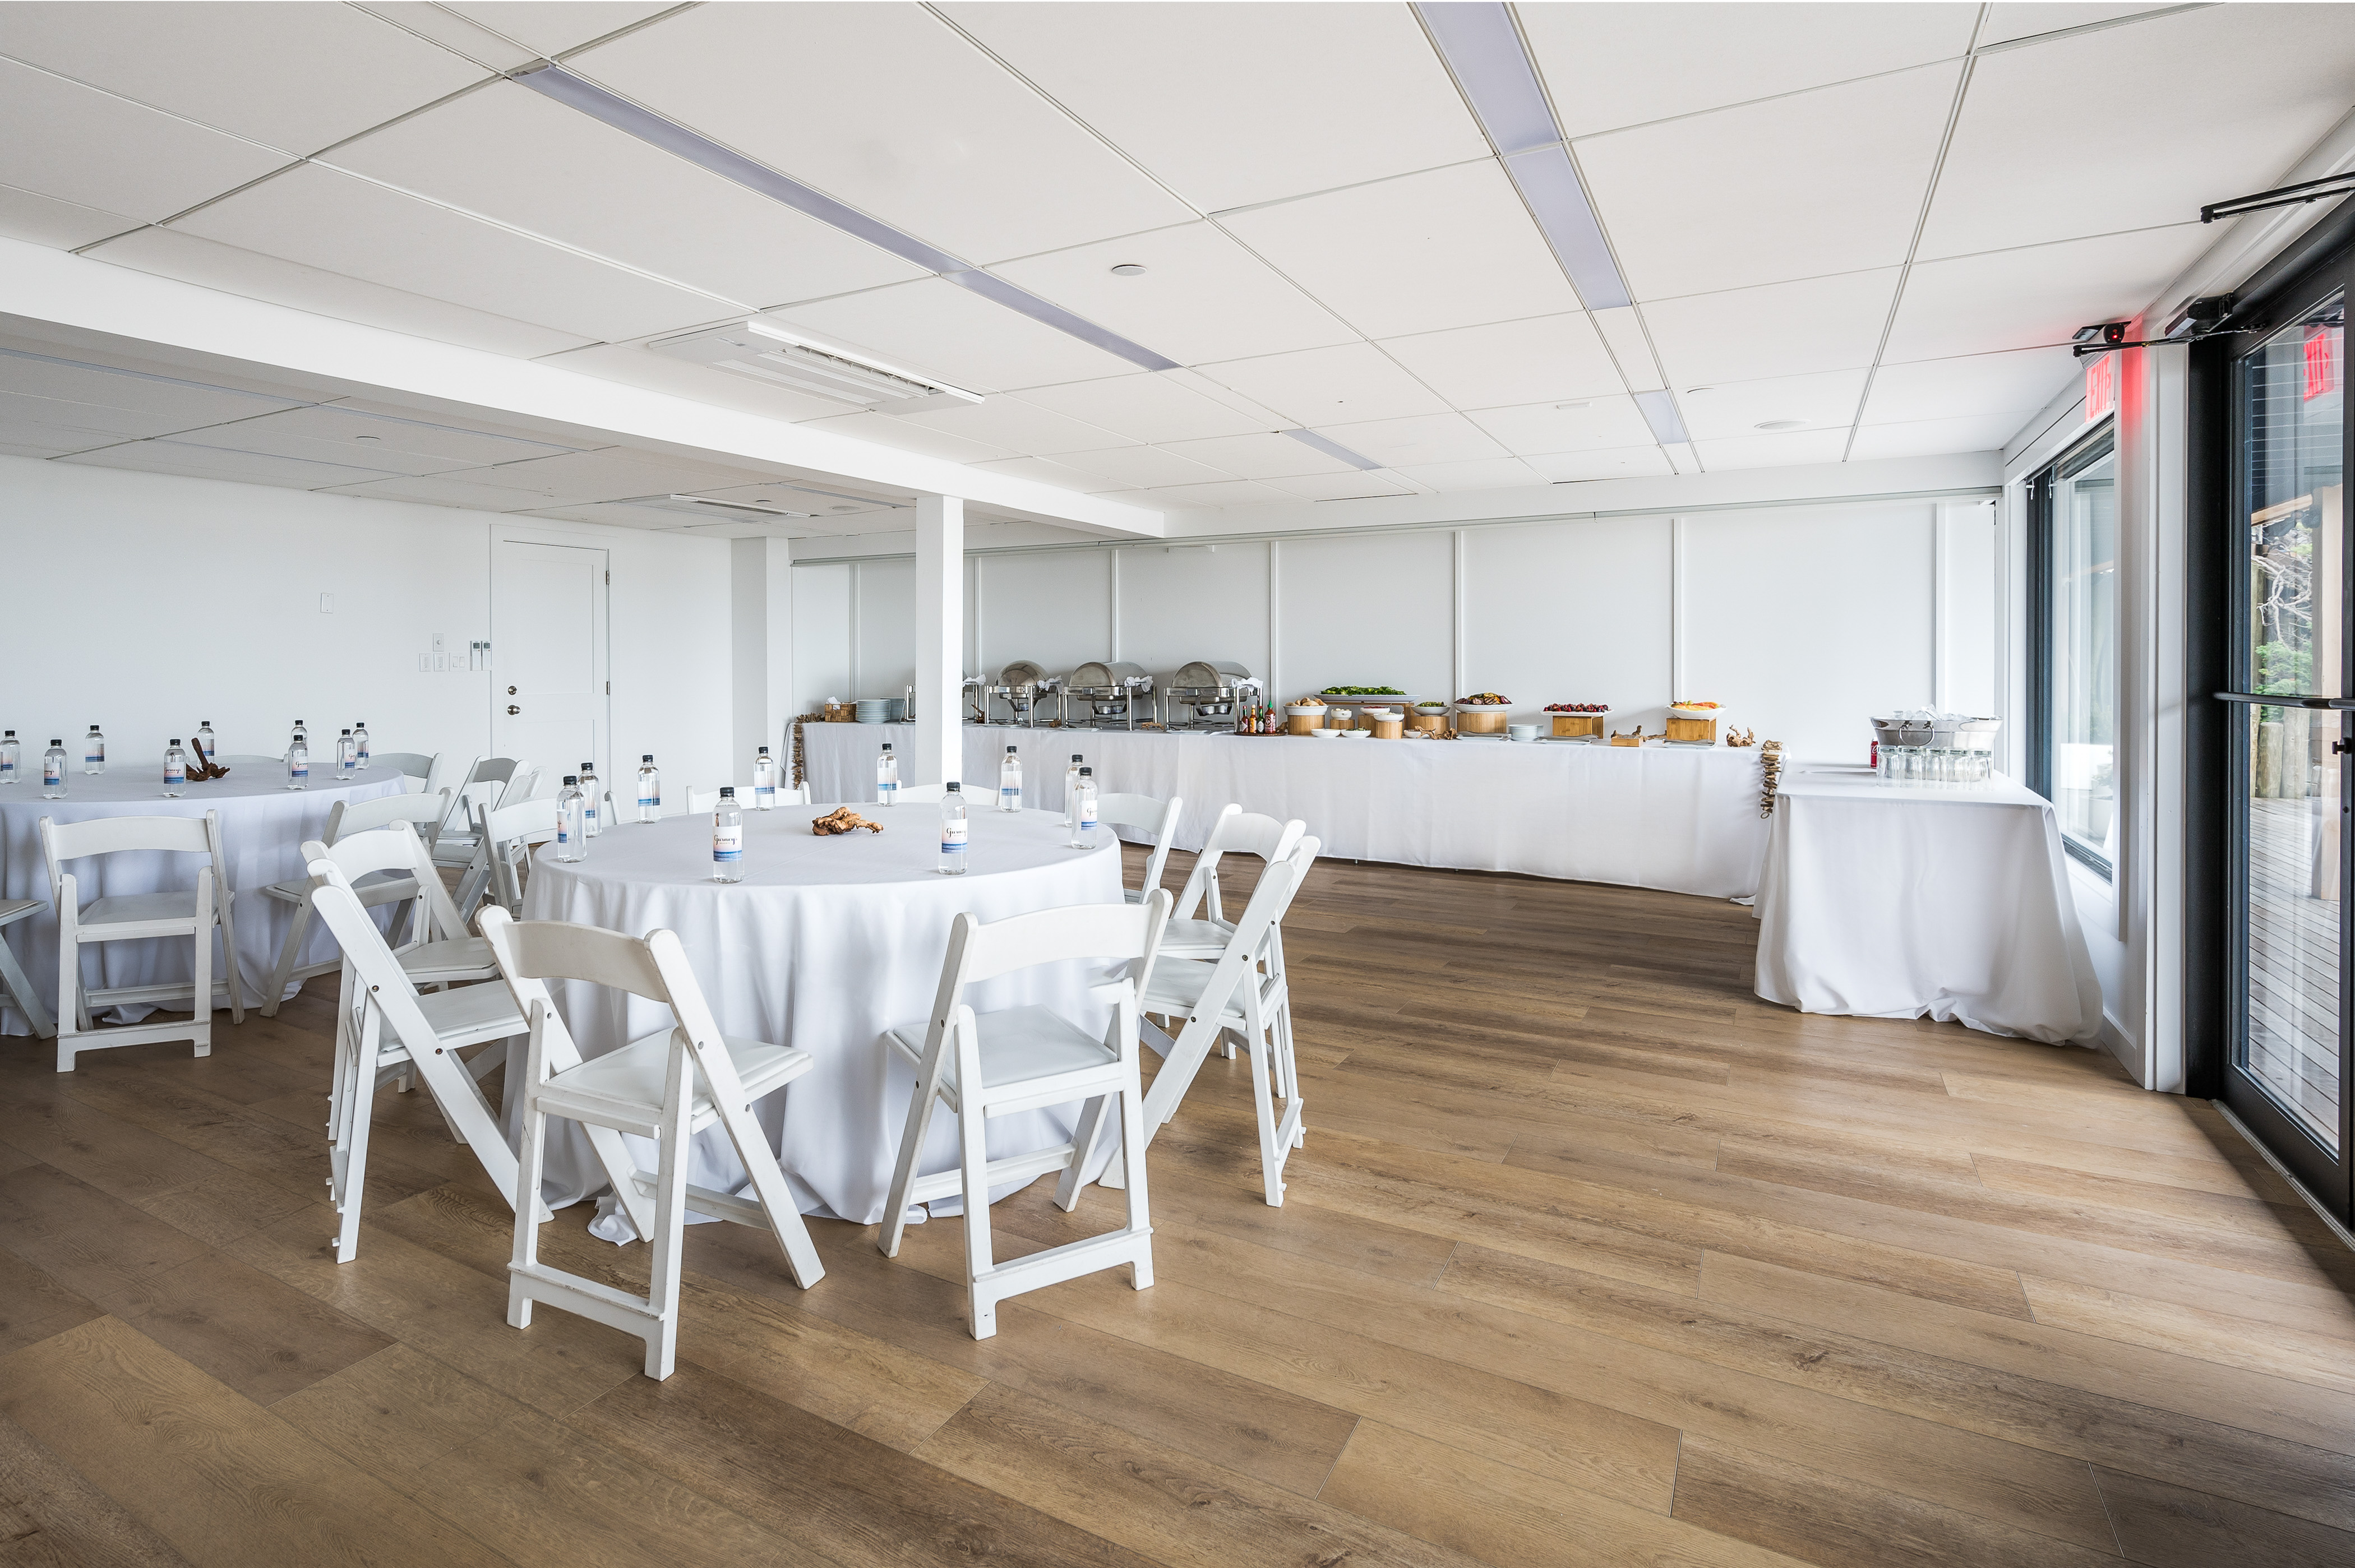 Longitude meeting venue with round top tables, white linens, white chairs and buffet table setup in back.